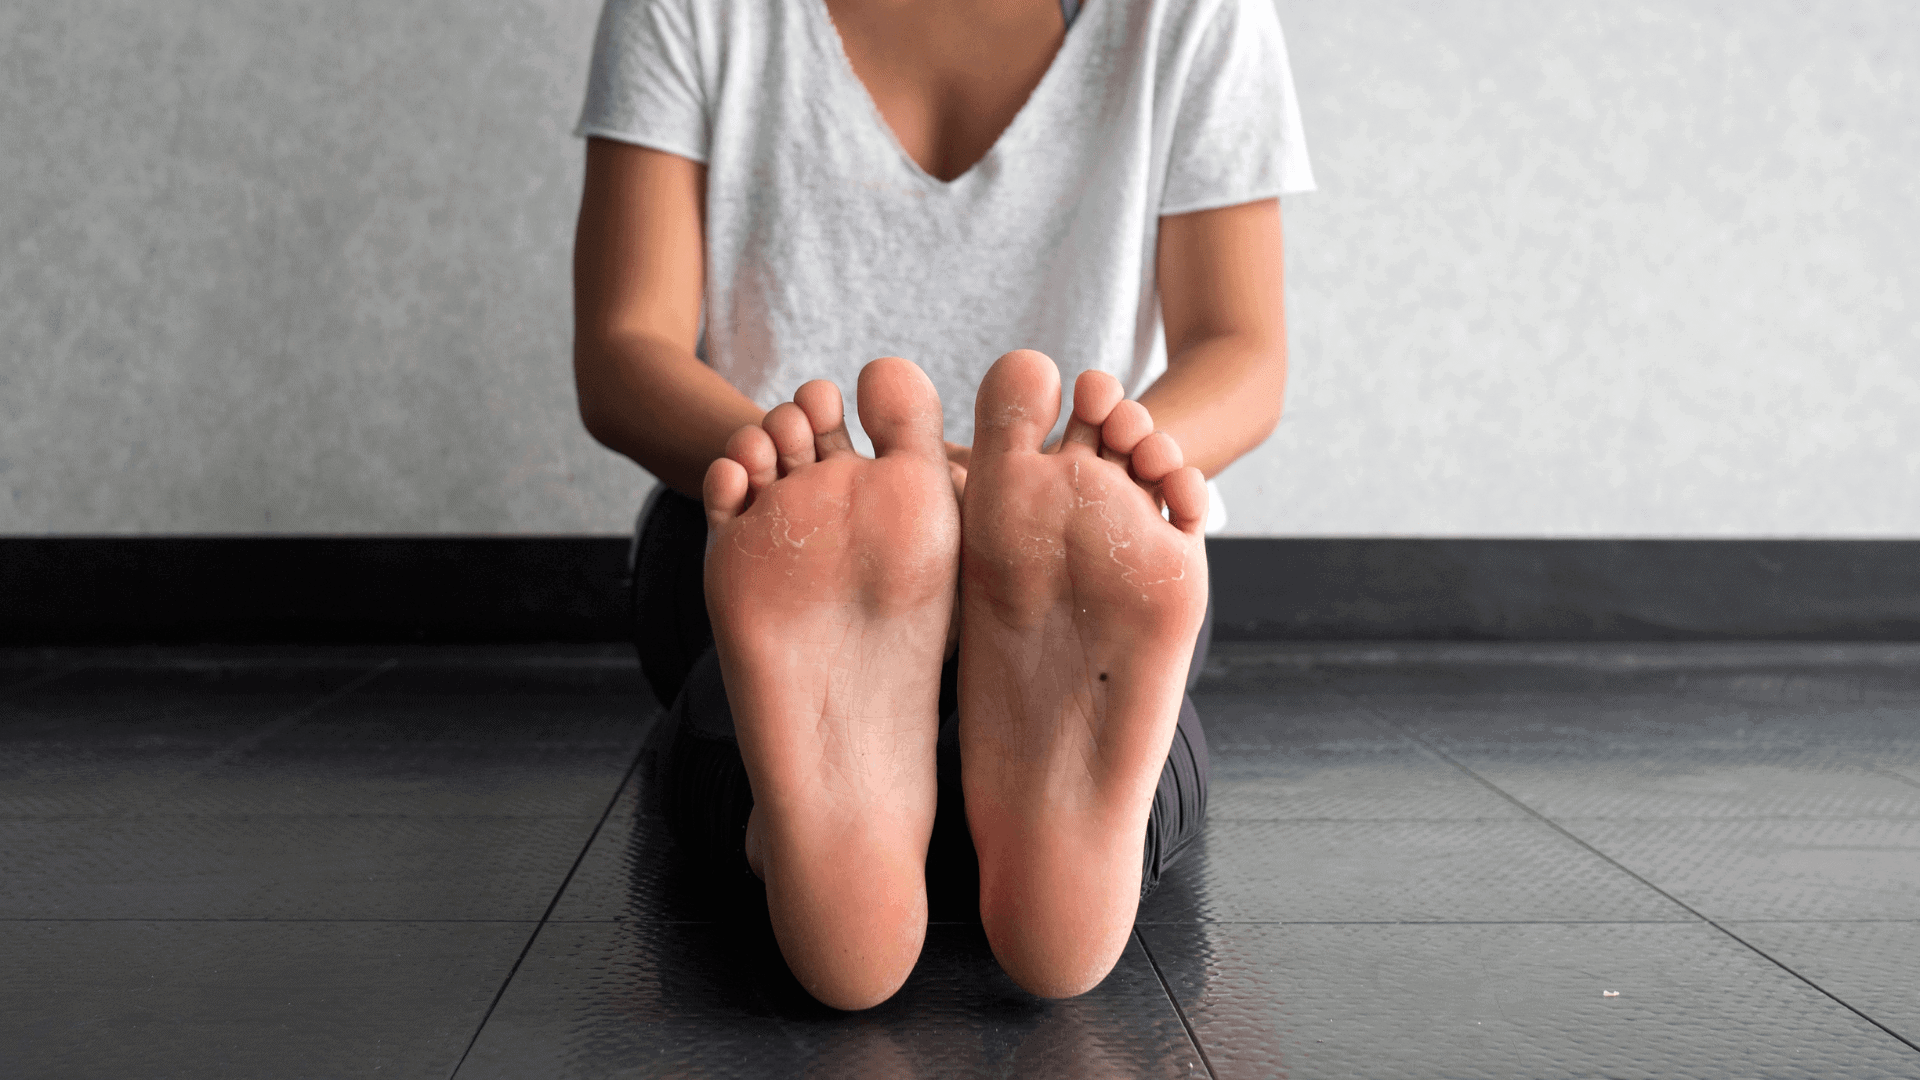 woman sitting on floor legs outstretched bare feet